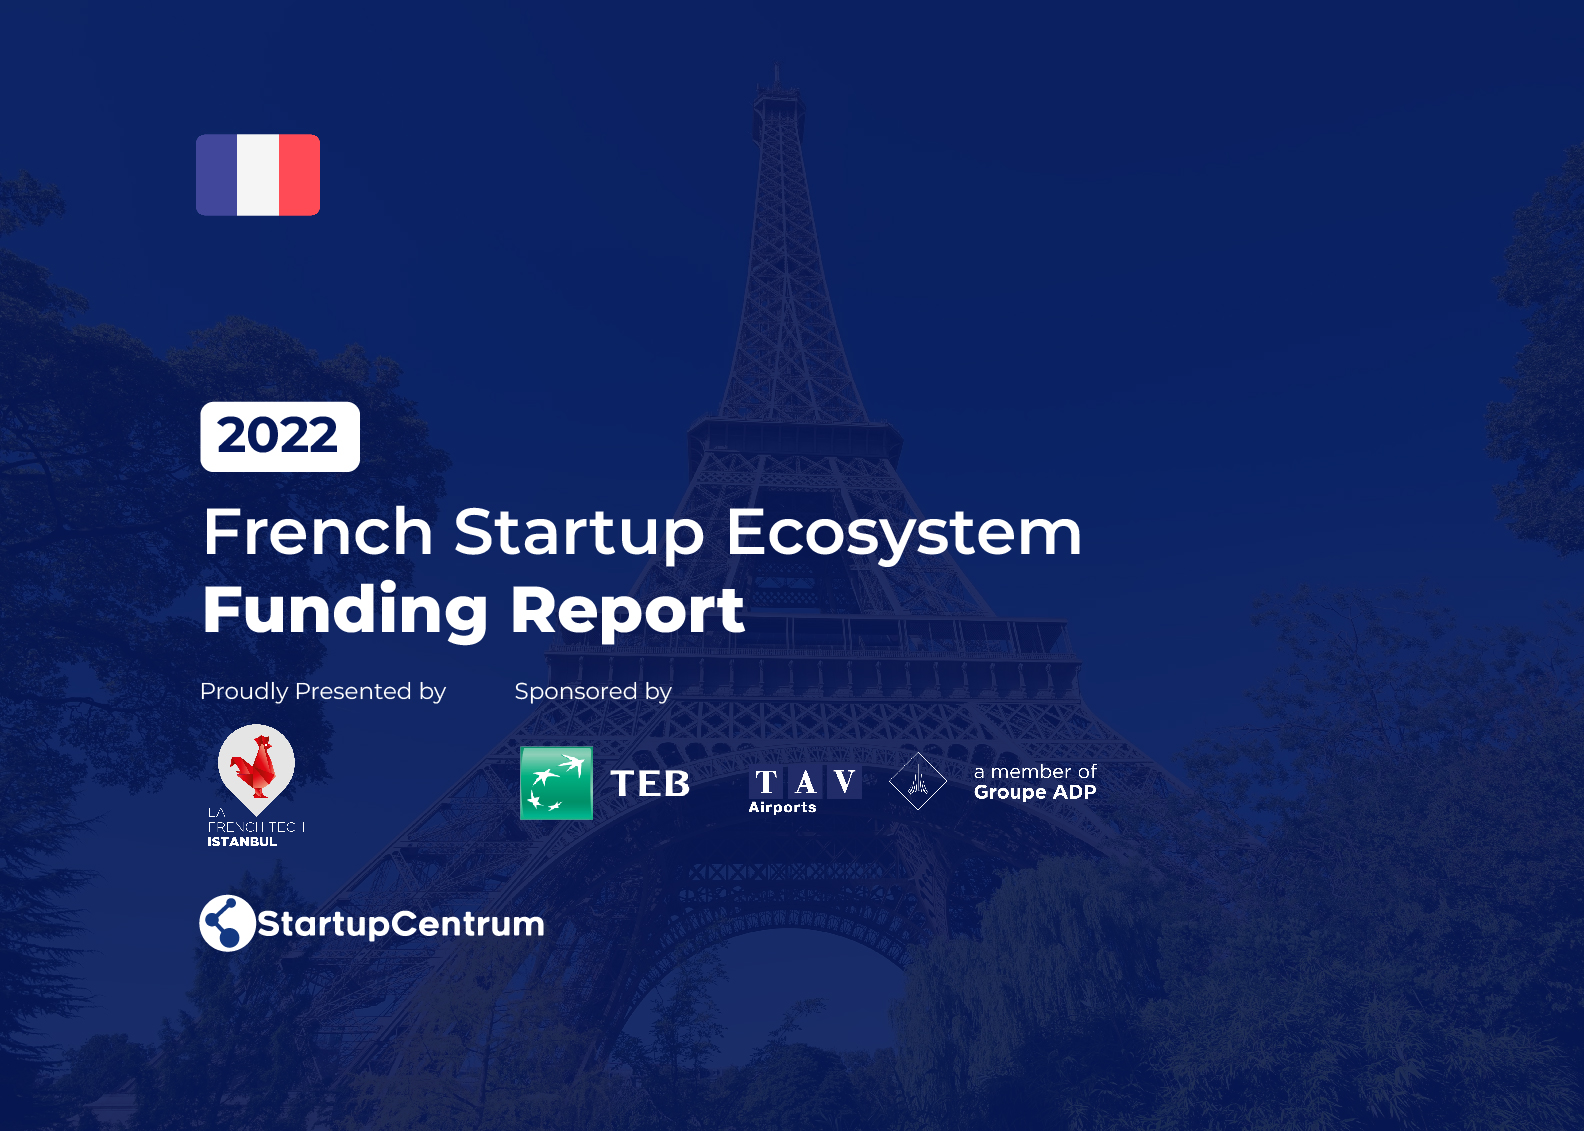 2022 French Startup Ecosytem Funding Report Cover Image